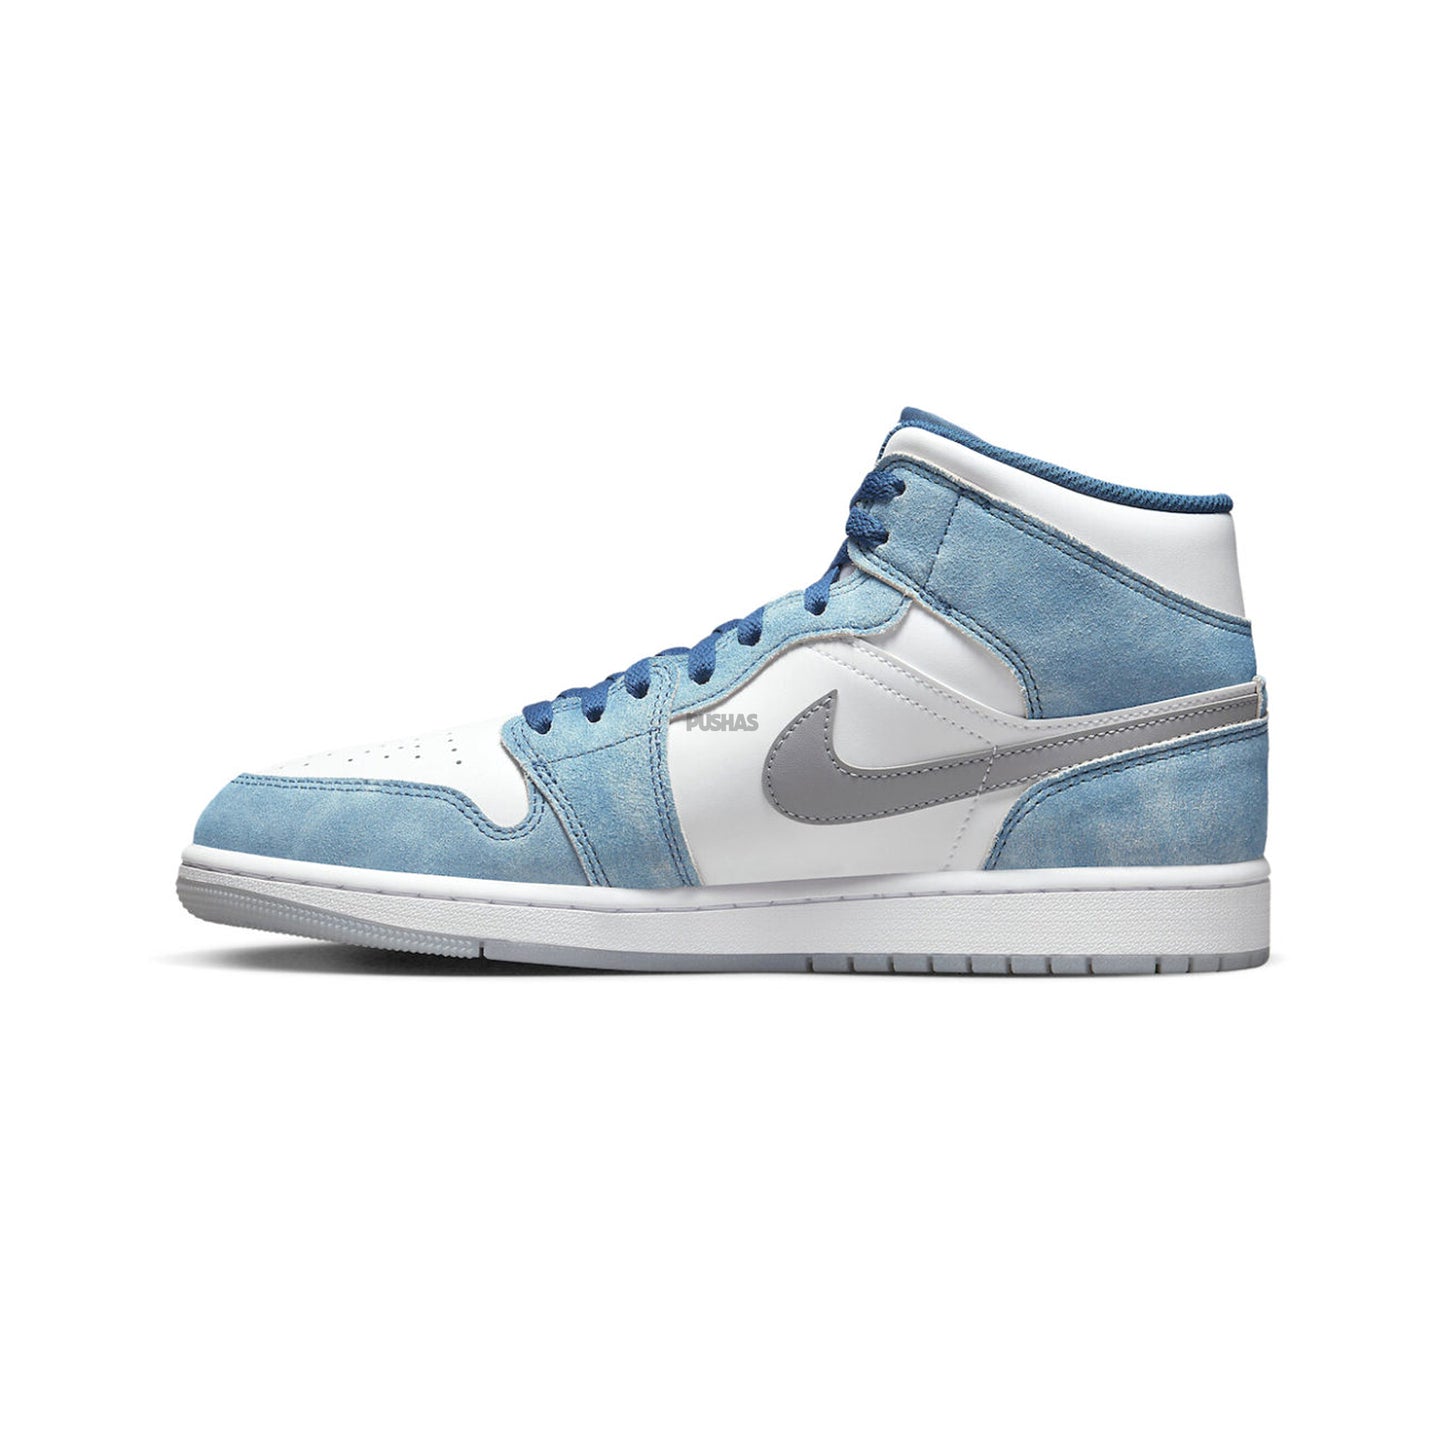 Air Jordan 1 Mid 'French Blue Fire Red' (2022)